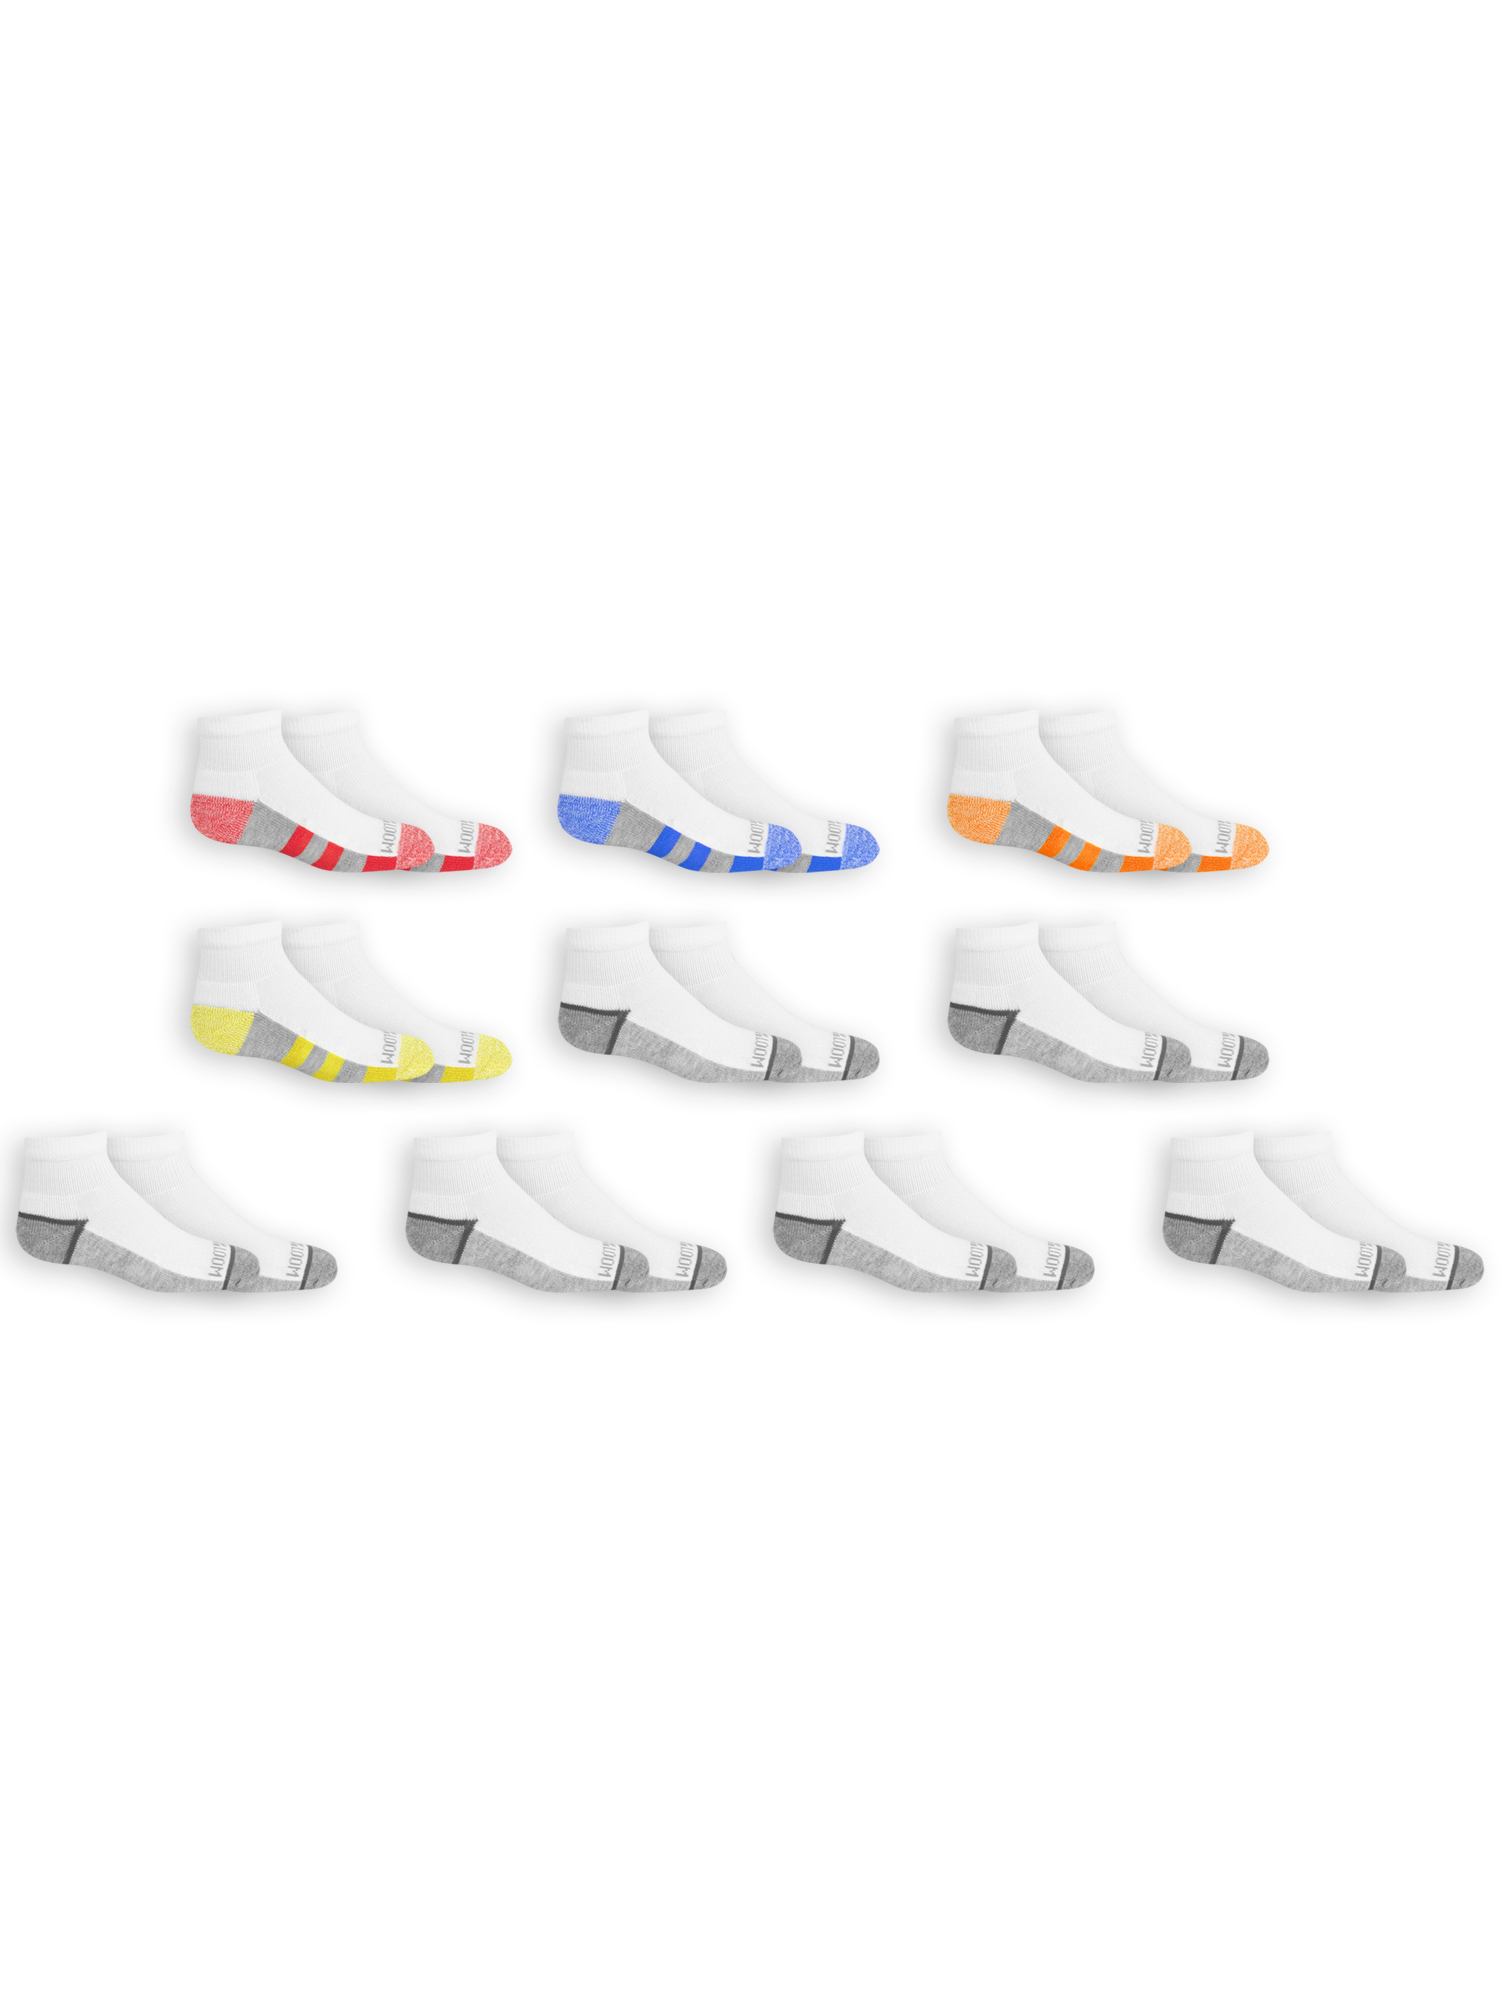 Fruit of the Loom Boys Zone Cushion Ankle Socks 10 Pack, (Little Kids & Big Kids) White Assorted, L - image 3 of 5